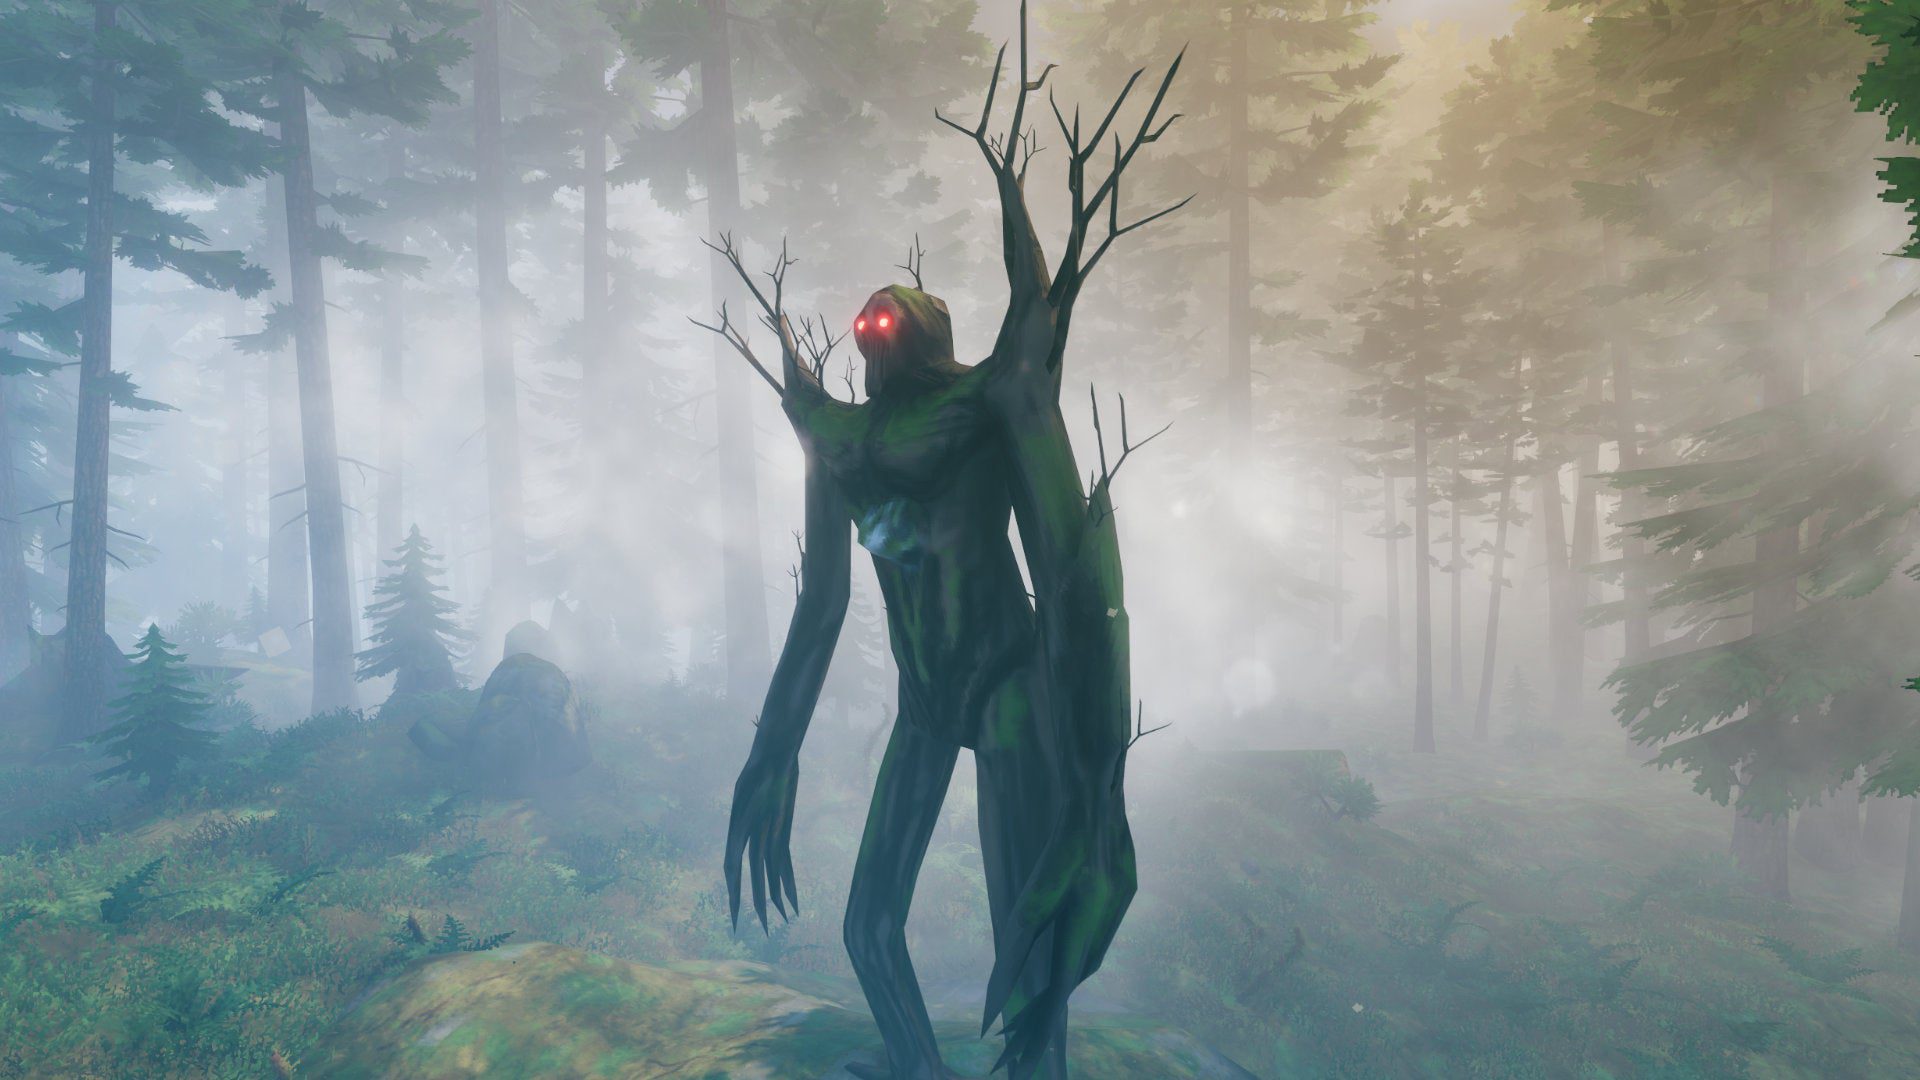 Valheim a game filled with nordic cults and rituals